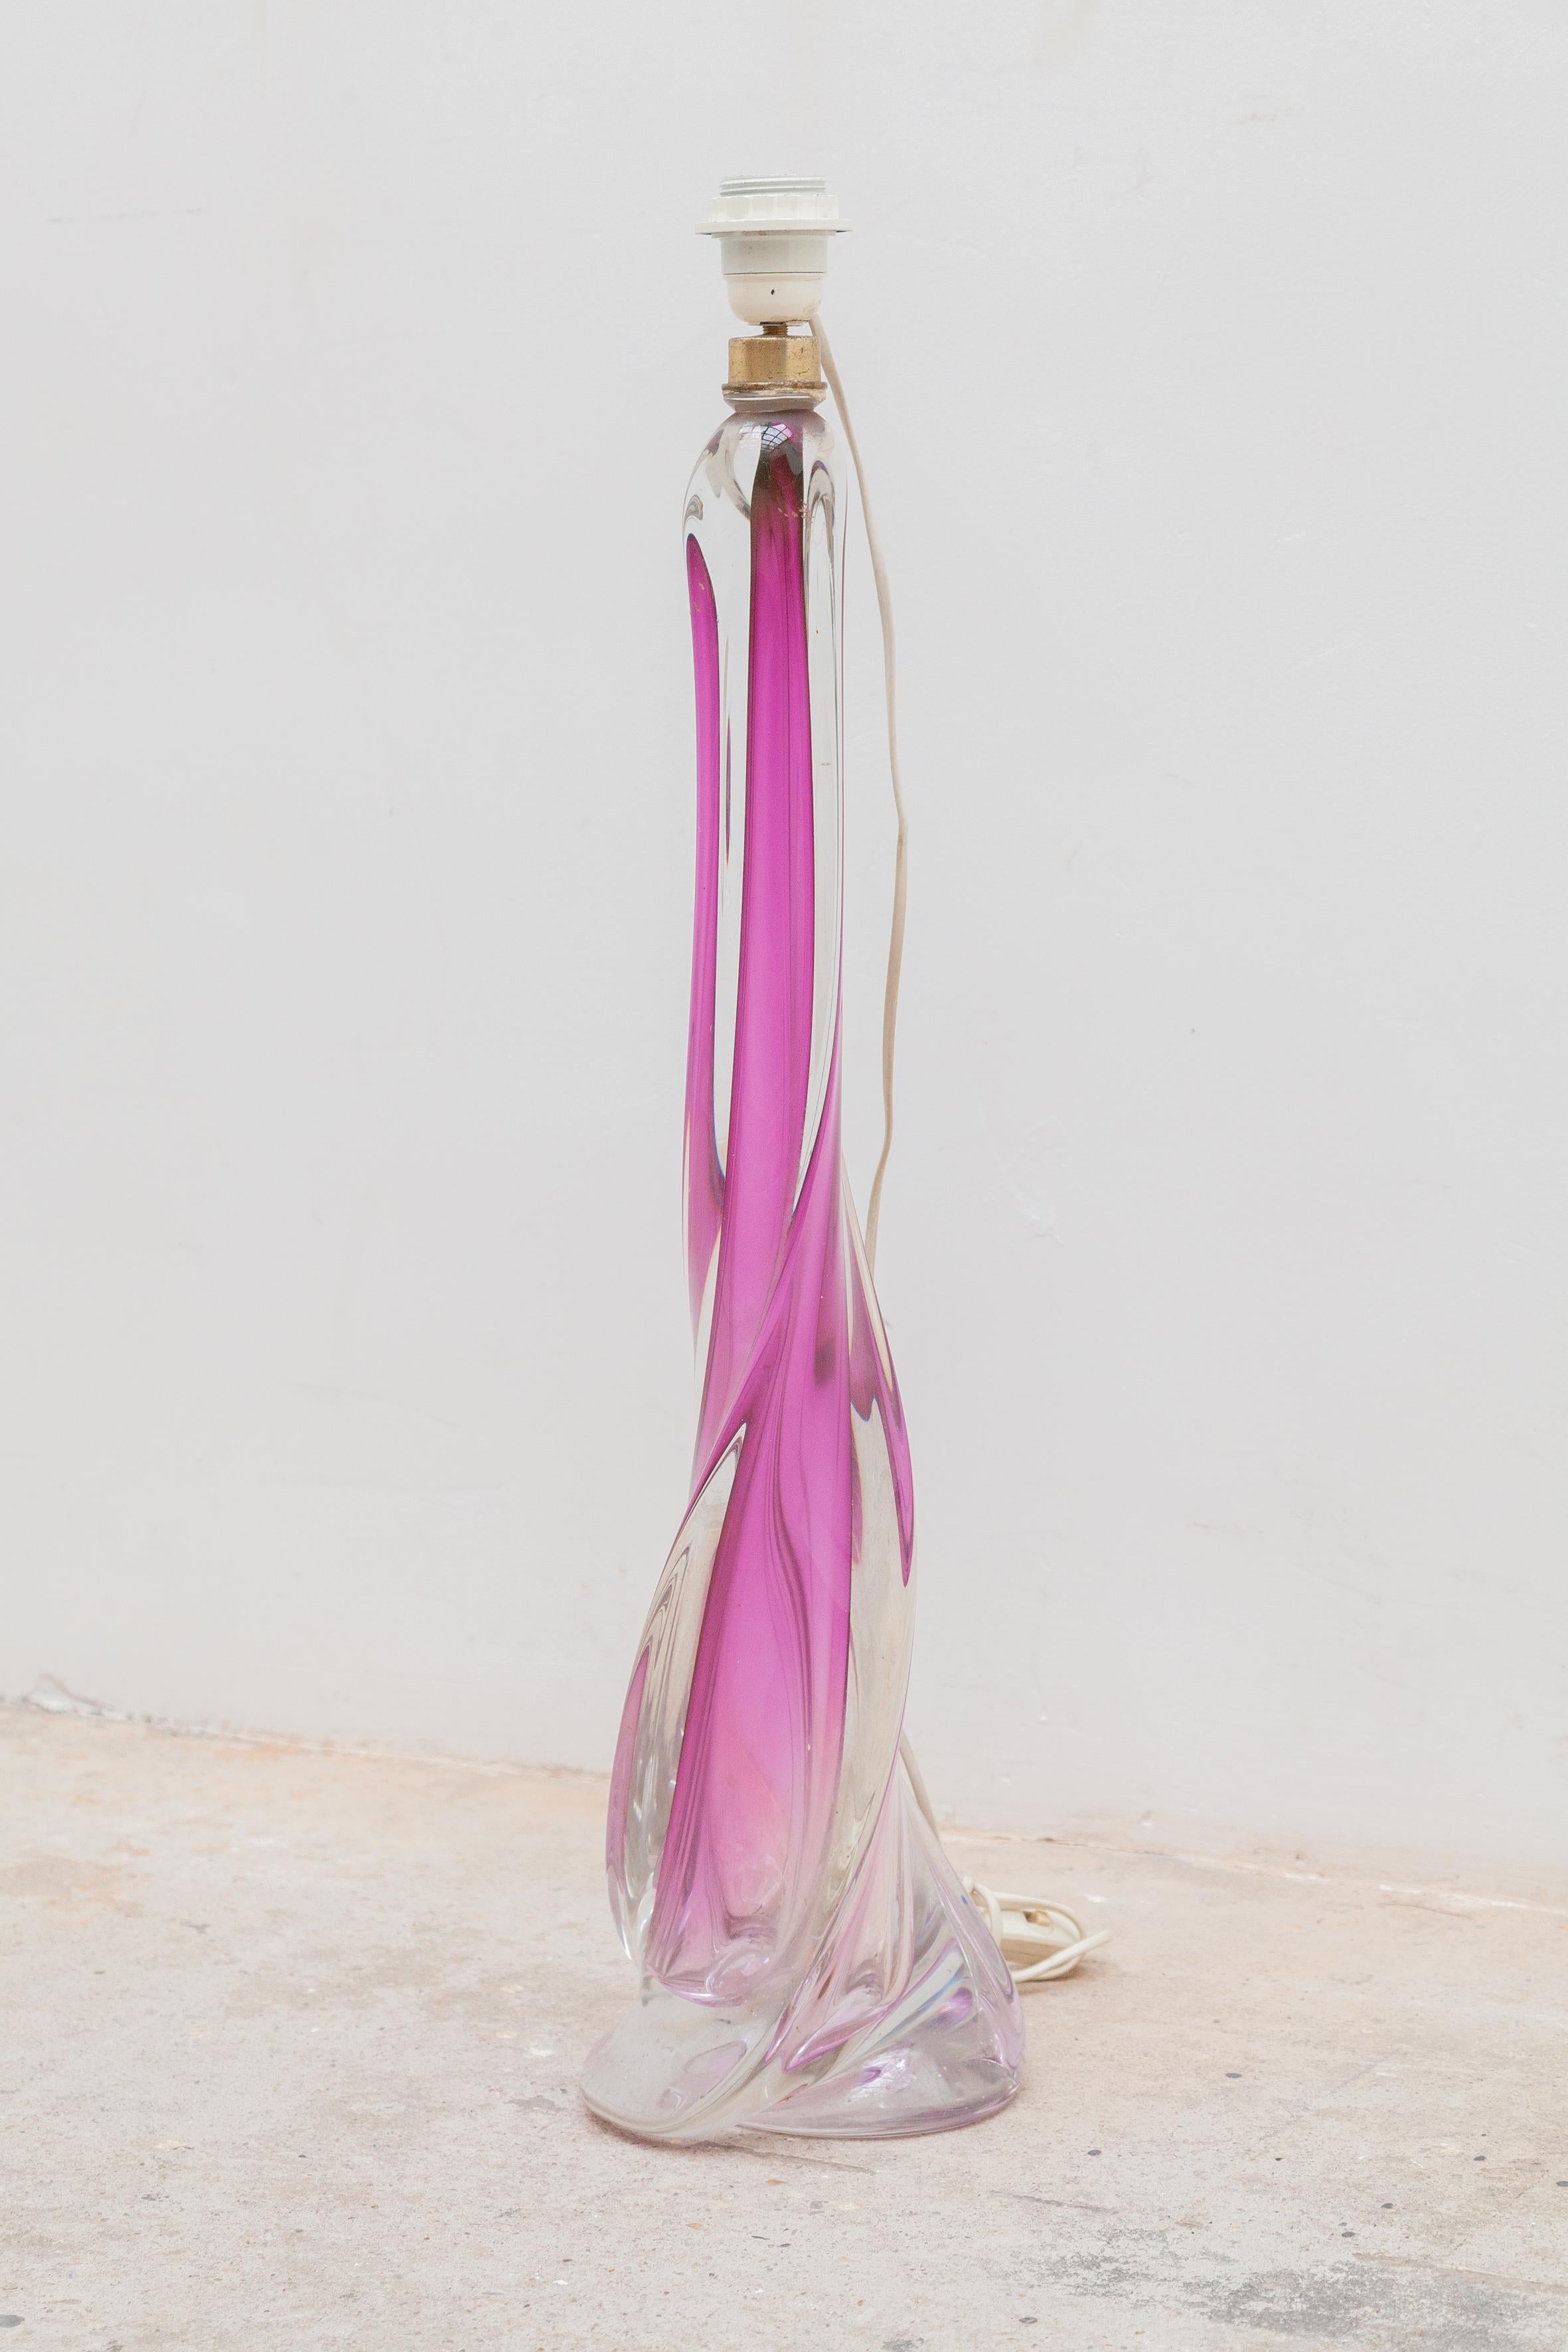 Beautiful large piece of glass sculpture floor or table lamp. The Pink colored core gives a beautiful nuance in a clear crystal casing typical of Val Saint Lambert glass art.
The twist on the outer surface of the glass sculpture gives a mesmerizing